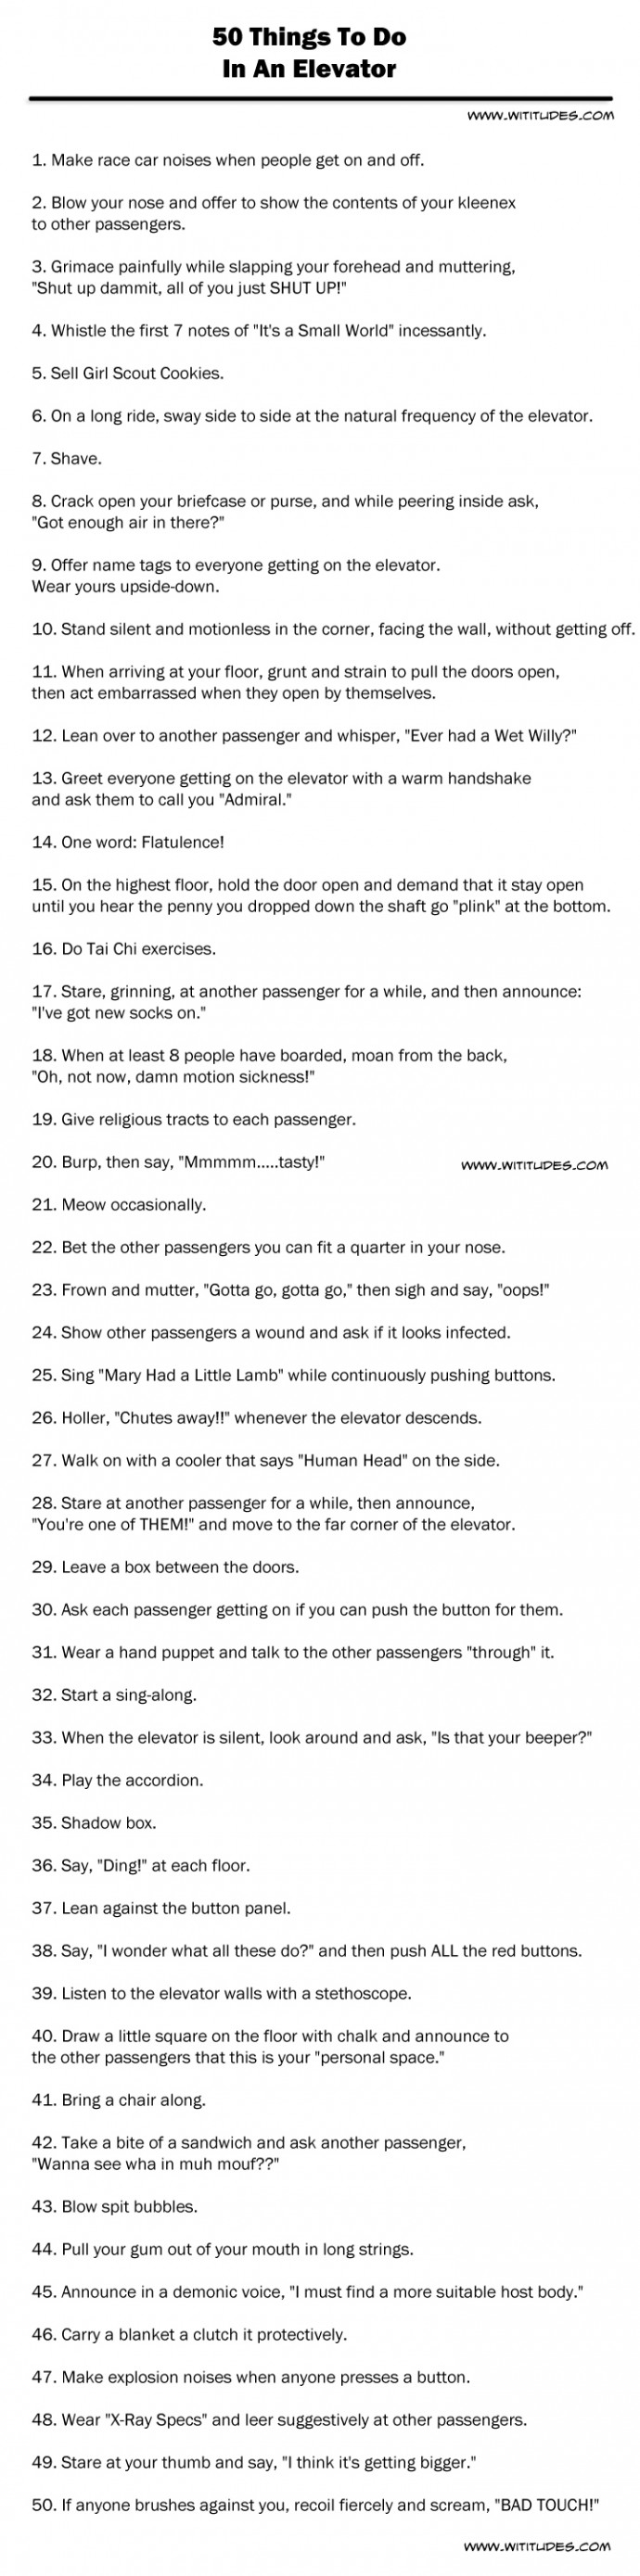 50 Things To Do In An Elevator